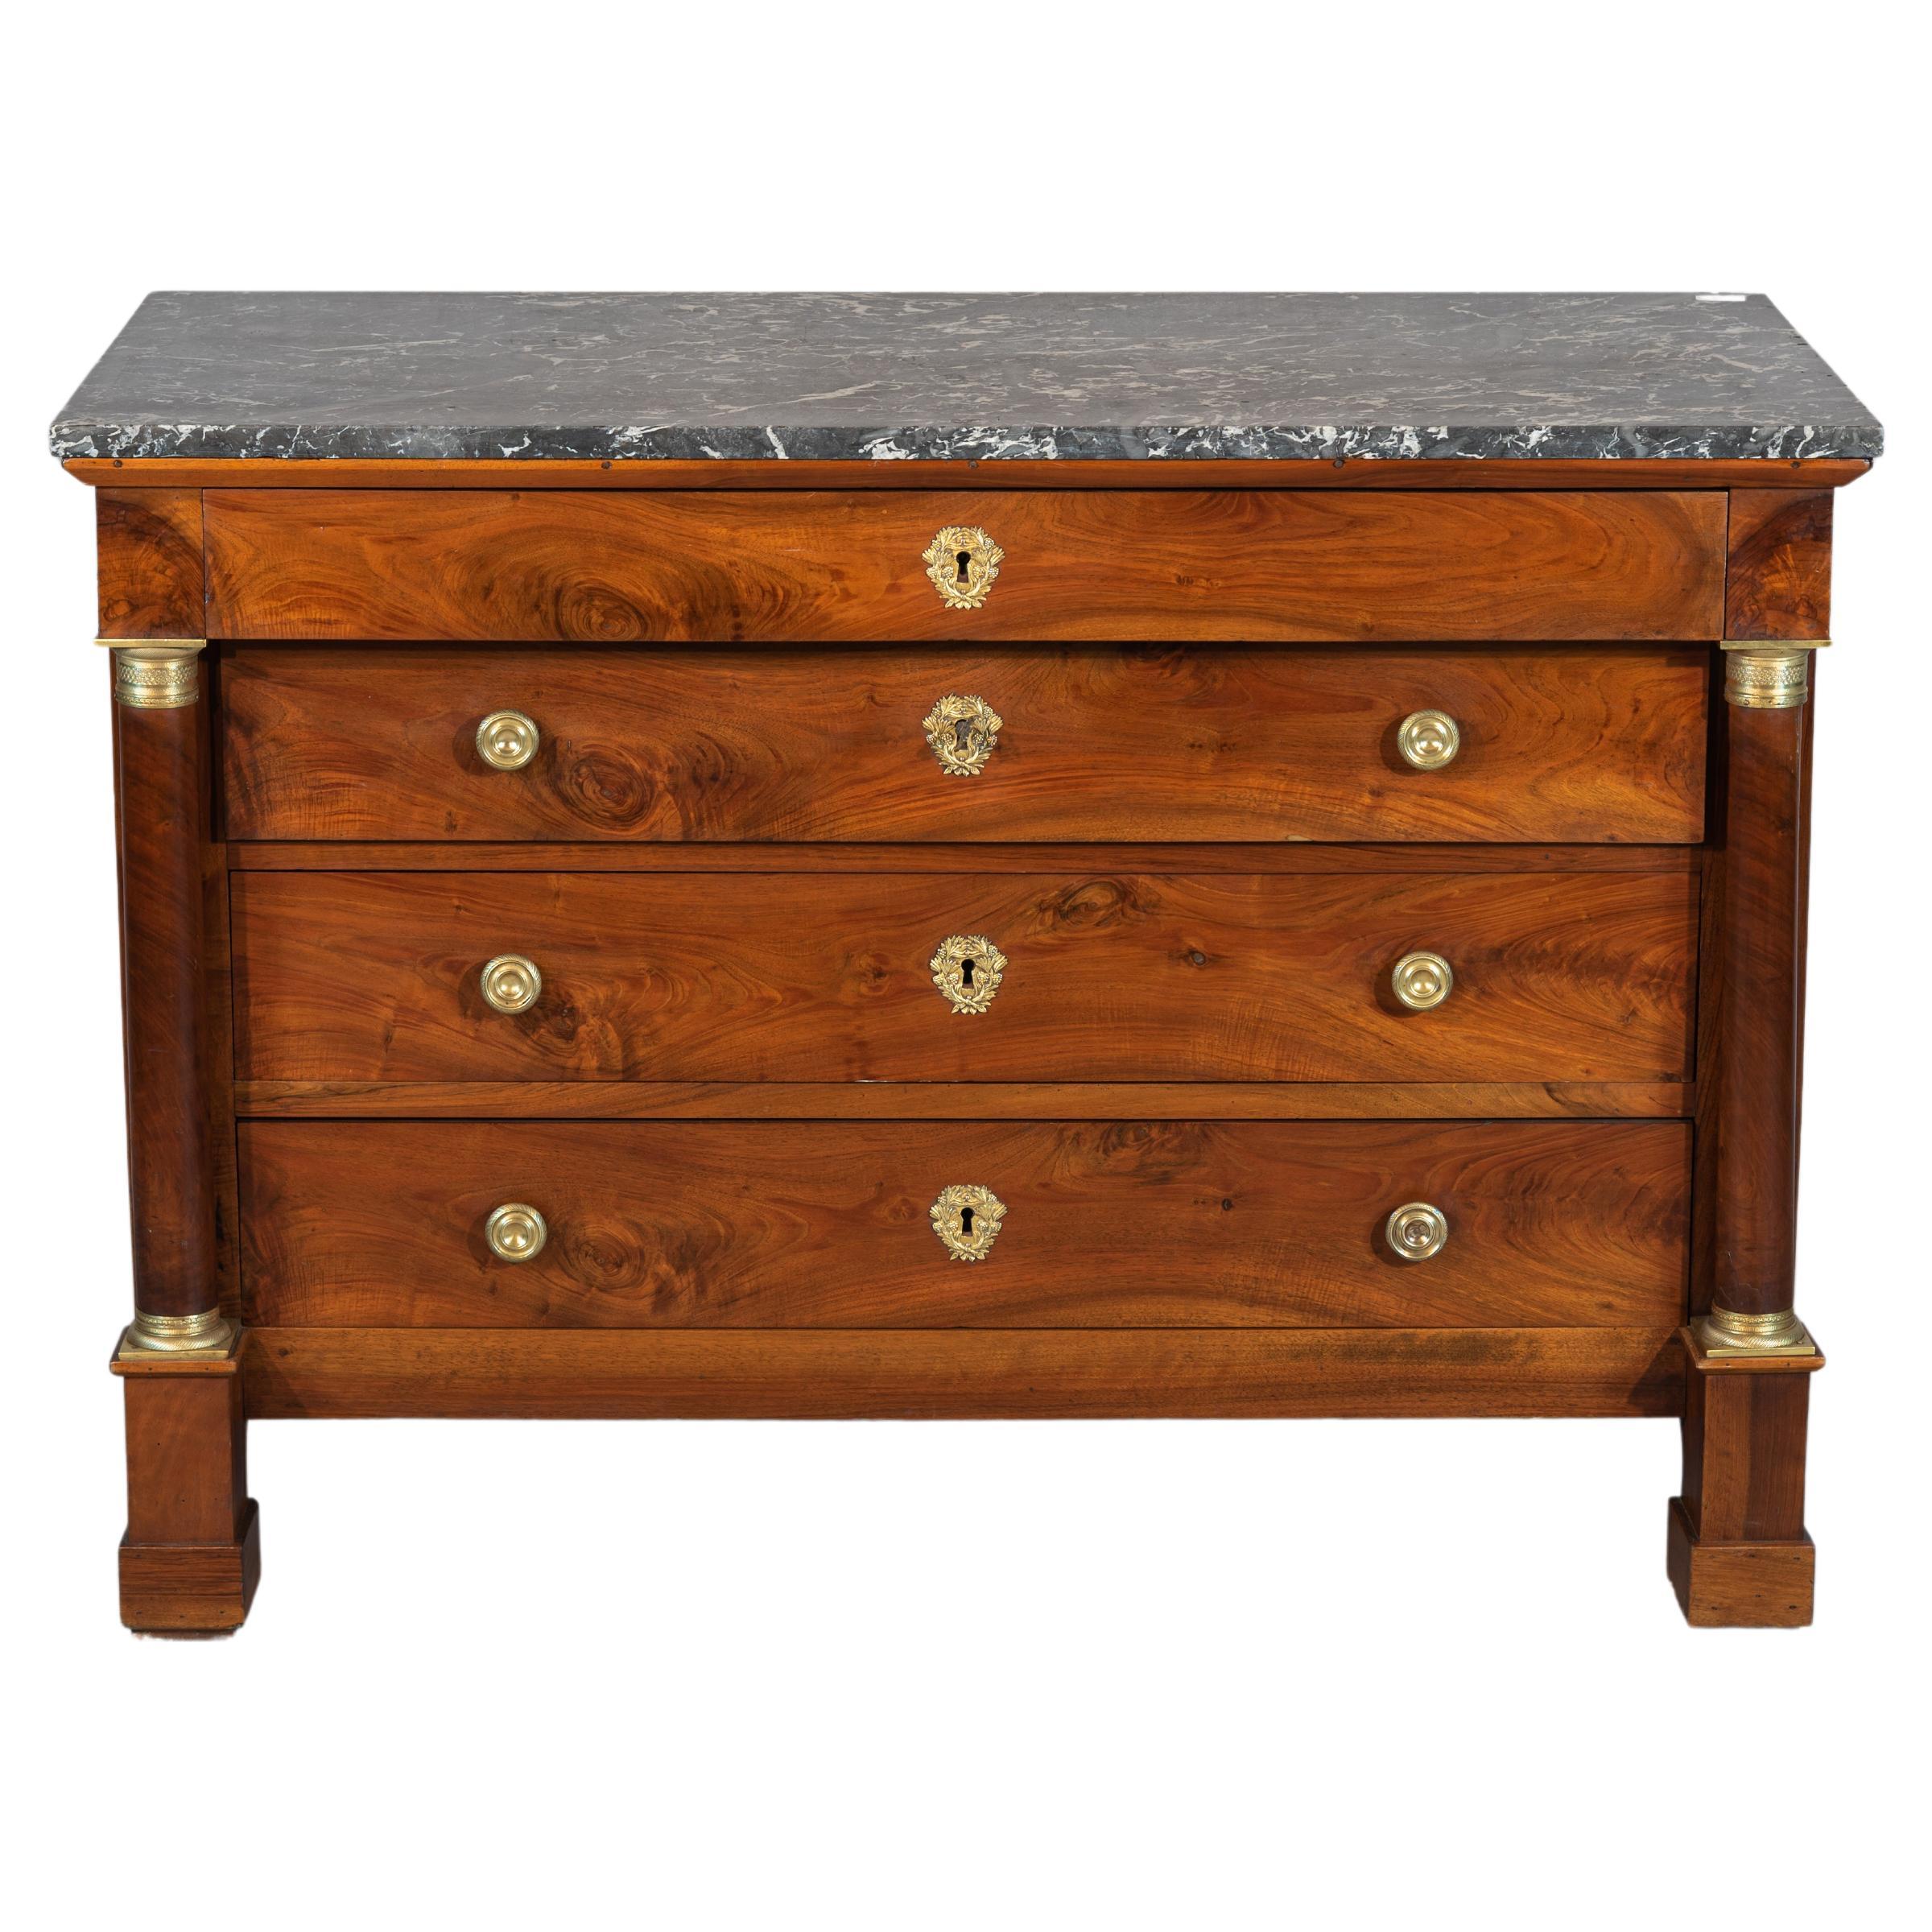 19th Century French Empire Period Walnut Commode For Sale